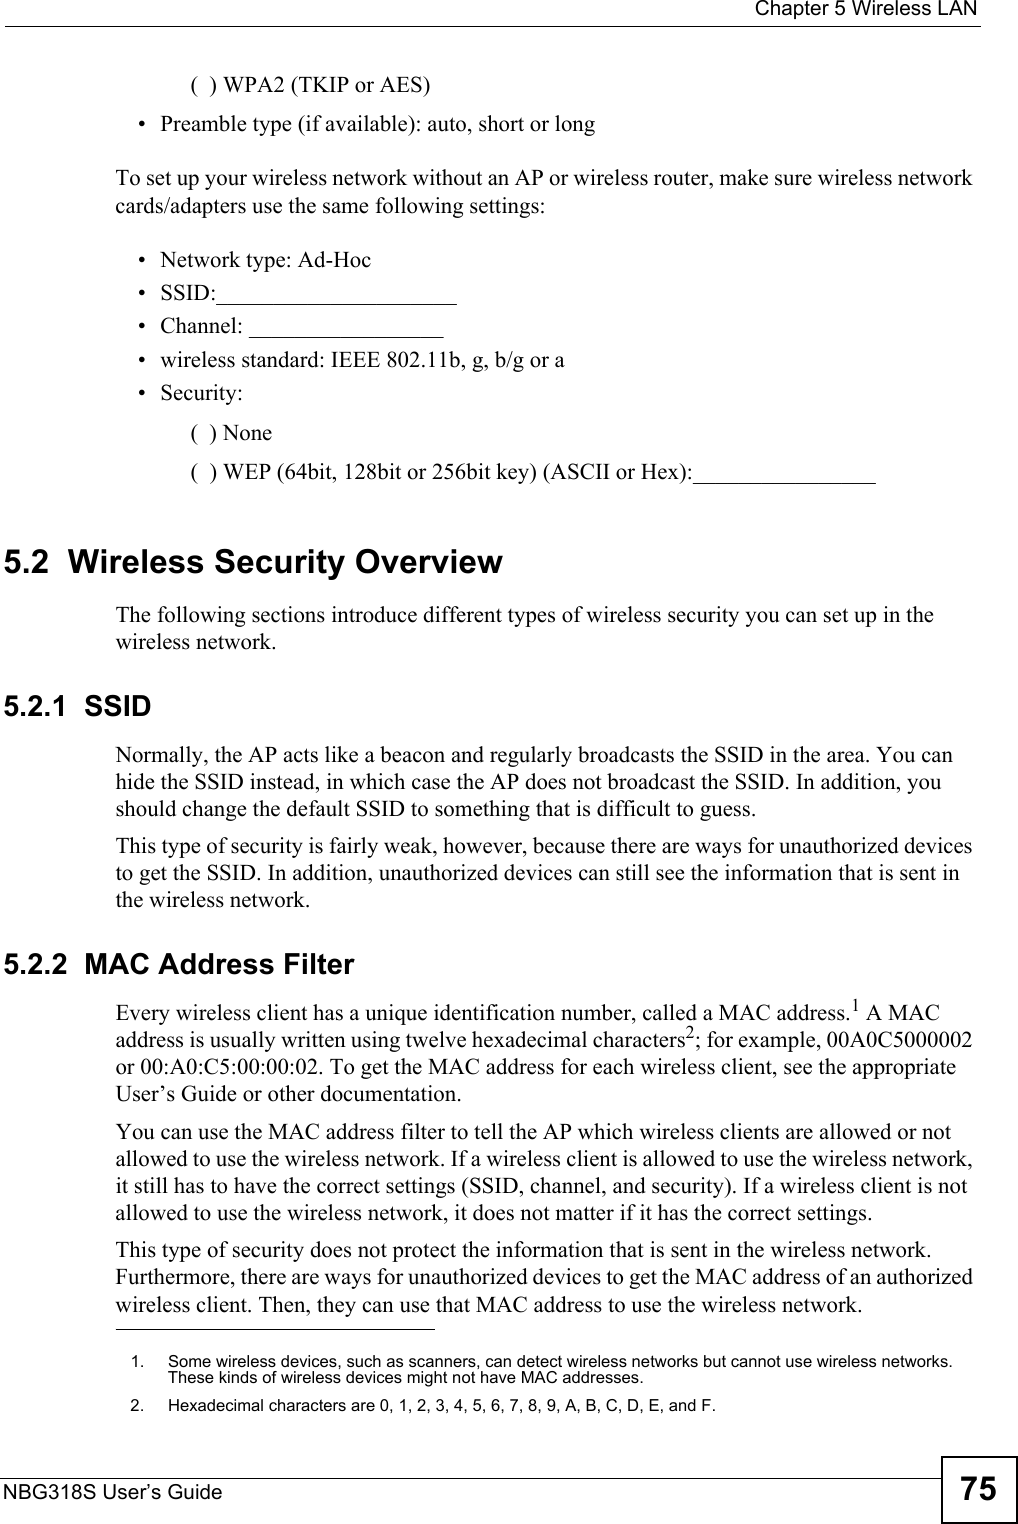  Chapter 5 Wireless LANNBG318S User’s Guide 75(  ) WPA2 (TKIP or AES)• Preamble type (if available): auto, short or longTo set up your wireless network without an AP or wireless router, make sure wireless network cards/adapters use the same following settings:• Network type: Ad-Hoc• SSID:_____________________• Channel: _________________• wireless standard: IEEE 802.11b, g, b/g or a• Security: (  ) None(  ) WEP (64bit, 128bit or 256bit key) (ASCII or Hex):________________5.2  Wireless Security OverviewThe following sections introduce different types of wireless security you can set up in the wireless network.5.2.1  SSIDNormally, the AP acts like a beacon and regularly broadcasts the SSID in the area. You can hide the SSID instead, in which case the AP does not broadcast the SSID. In addition, you should change the default SSID to something that is difficult to guess.This type of security is fairly weak, however, because there are ways for unauthorized devices to get the SSID. In addition, unauthorized devices can still see the information that is sent in the wireless network.5.2.2  MAC Address FilterEvery wireless client has a unique identification number, called a MAC address.1 A MAC address is usually written using twelve hexadecimal characters2; for example, 00A0C5000002 or 00:A0:C5:00:00:02. To get the MAC address for each wireless client, see the appropriate User’s Guide or other documentation.You can use the MAC address filter to tell the AP which wireless clients are allowed or not allowed to use the wireless network. If a wireless client is allowed to use the wireless network, it still has to have the correct settings (SSID, channel, and security). If a wireless client is not allowed to use the wireless network, it does not matter if it has the correct settings.This type of security does not protect the information that is sent in the wireless network. Furthermore, there are ways for unauthorized devices to get the MAC address of an authorized wireless client. Then, they can use that MAC address to use the wireless network.1. Some wireless devices, such as scanners, can detect wireless networks but cannot use wireless networks. These kinds of wireless devices might not have MAC addresses.2. Hexadecimal characters are 0, 1, 2, 3, 4, 5, 6, 7, 8, 9, A, B, C, D, E, and F.